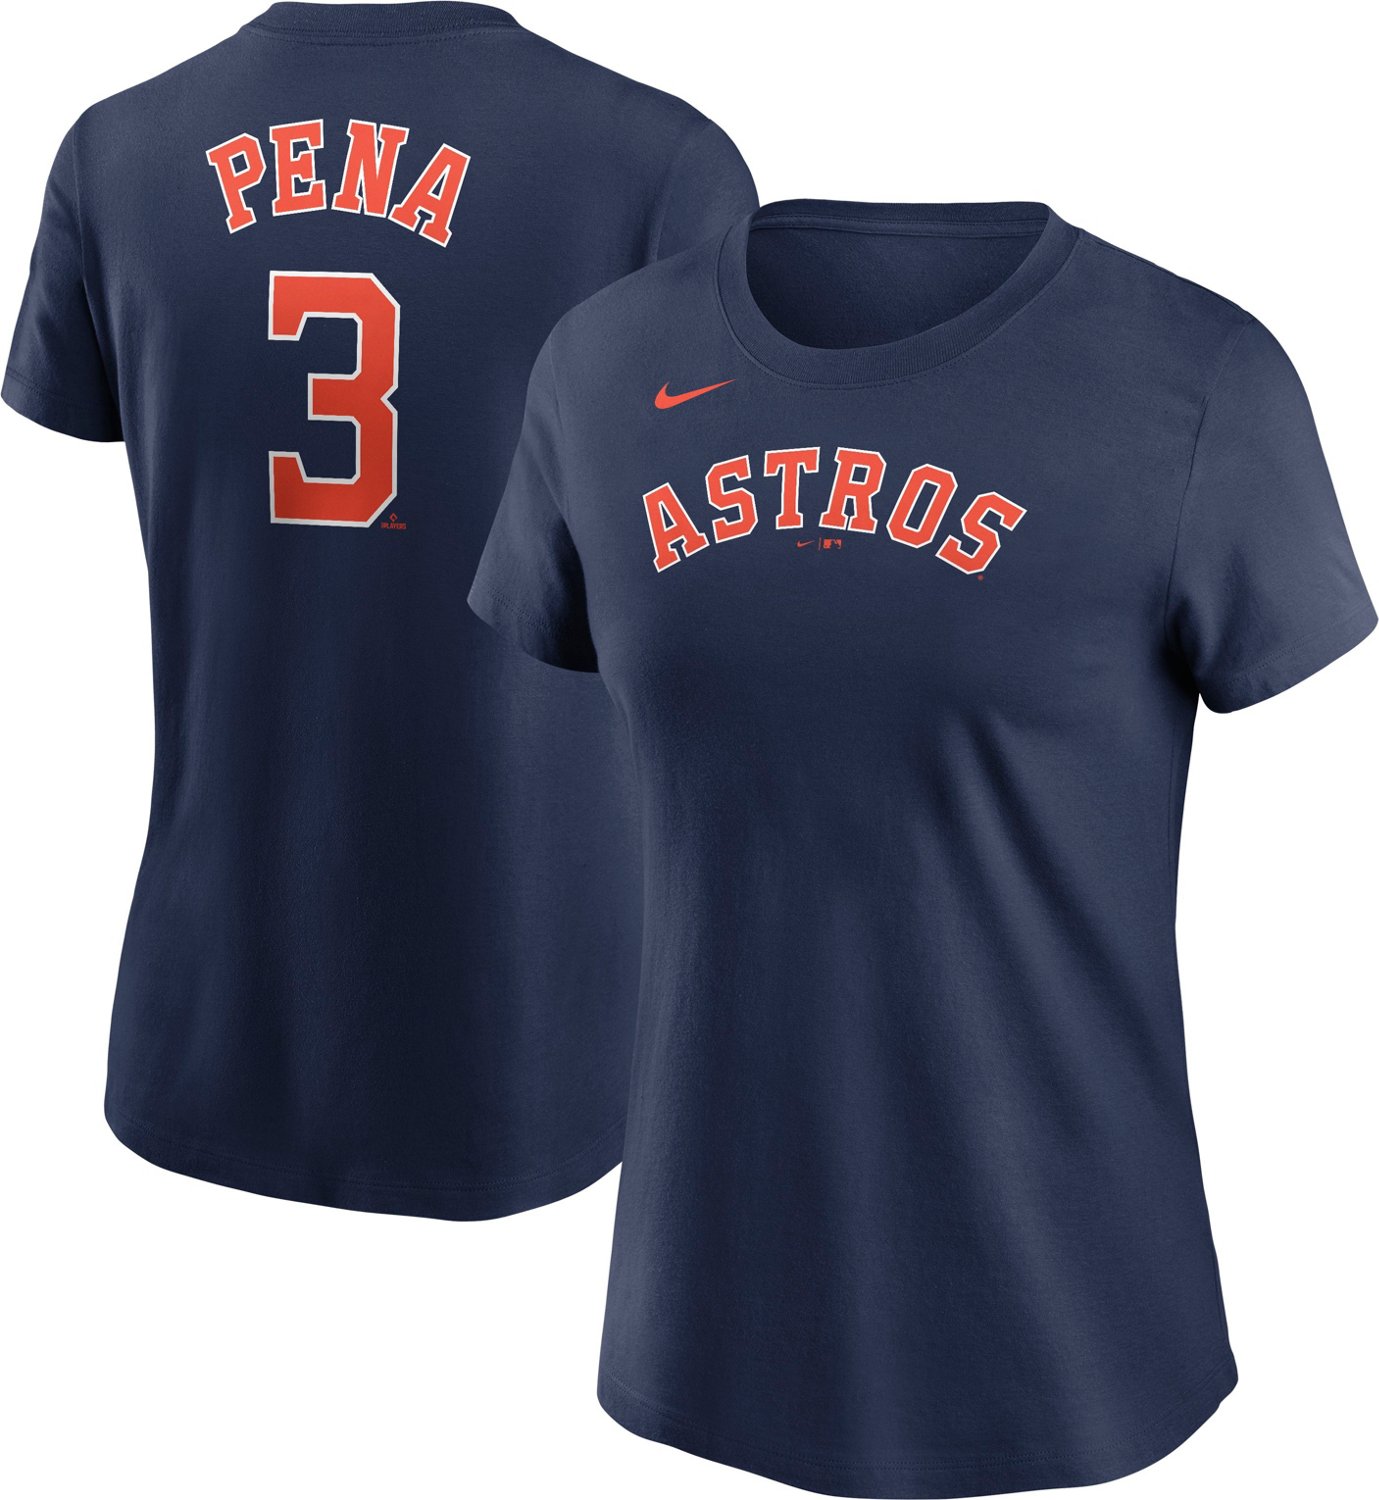 The Academy Brand, Tops, Houston Astros Womens Shirt From Academy